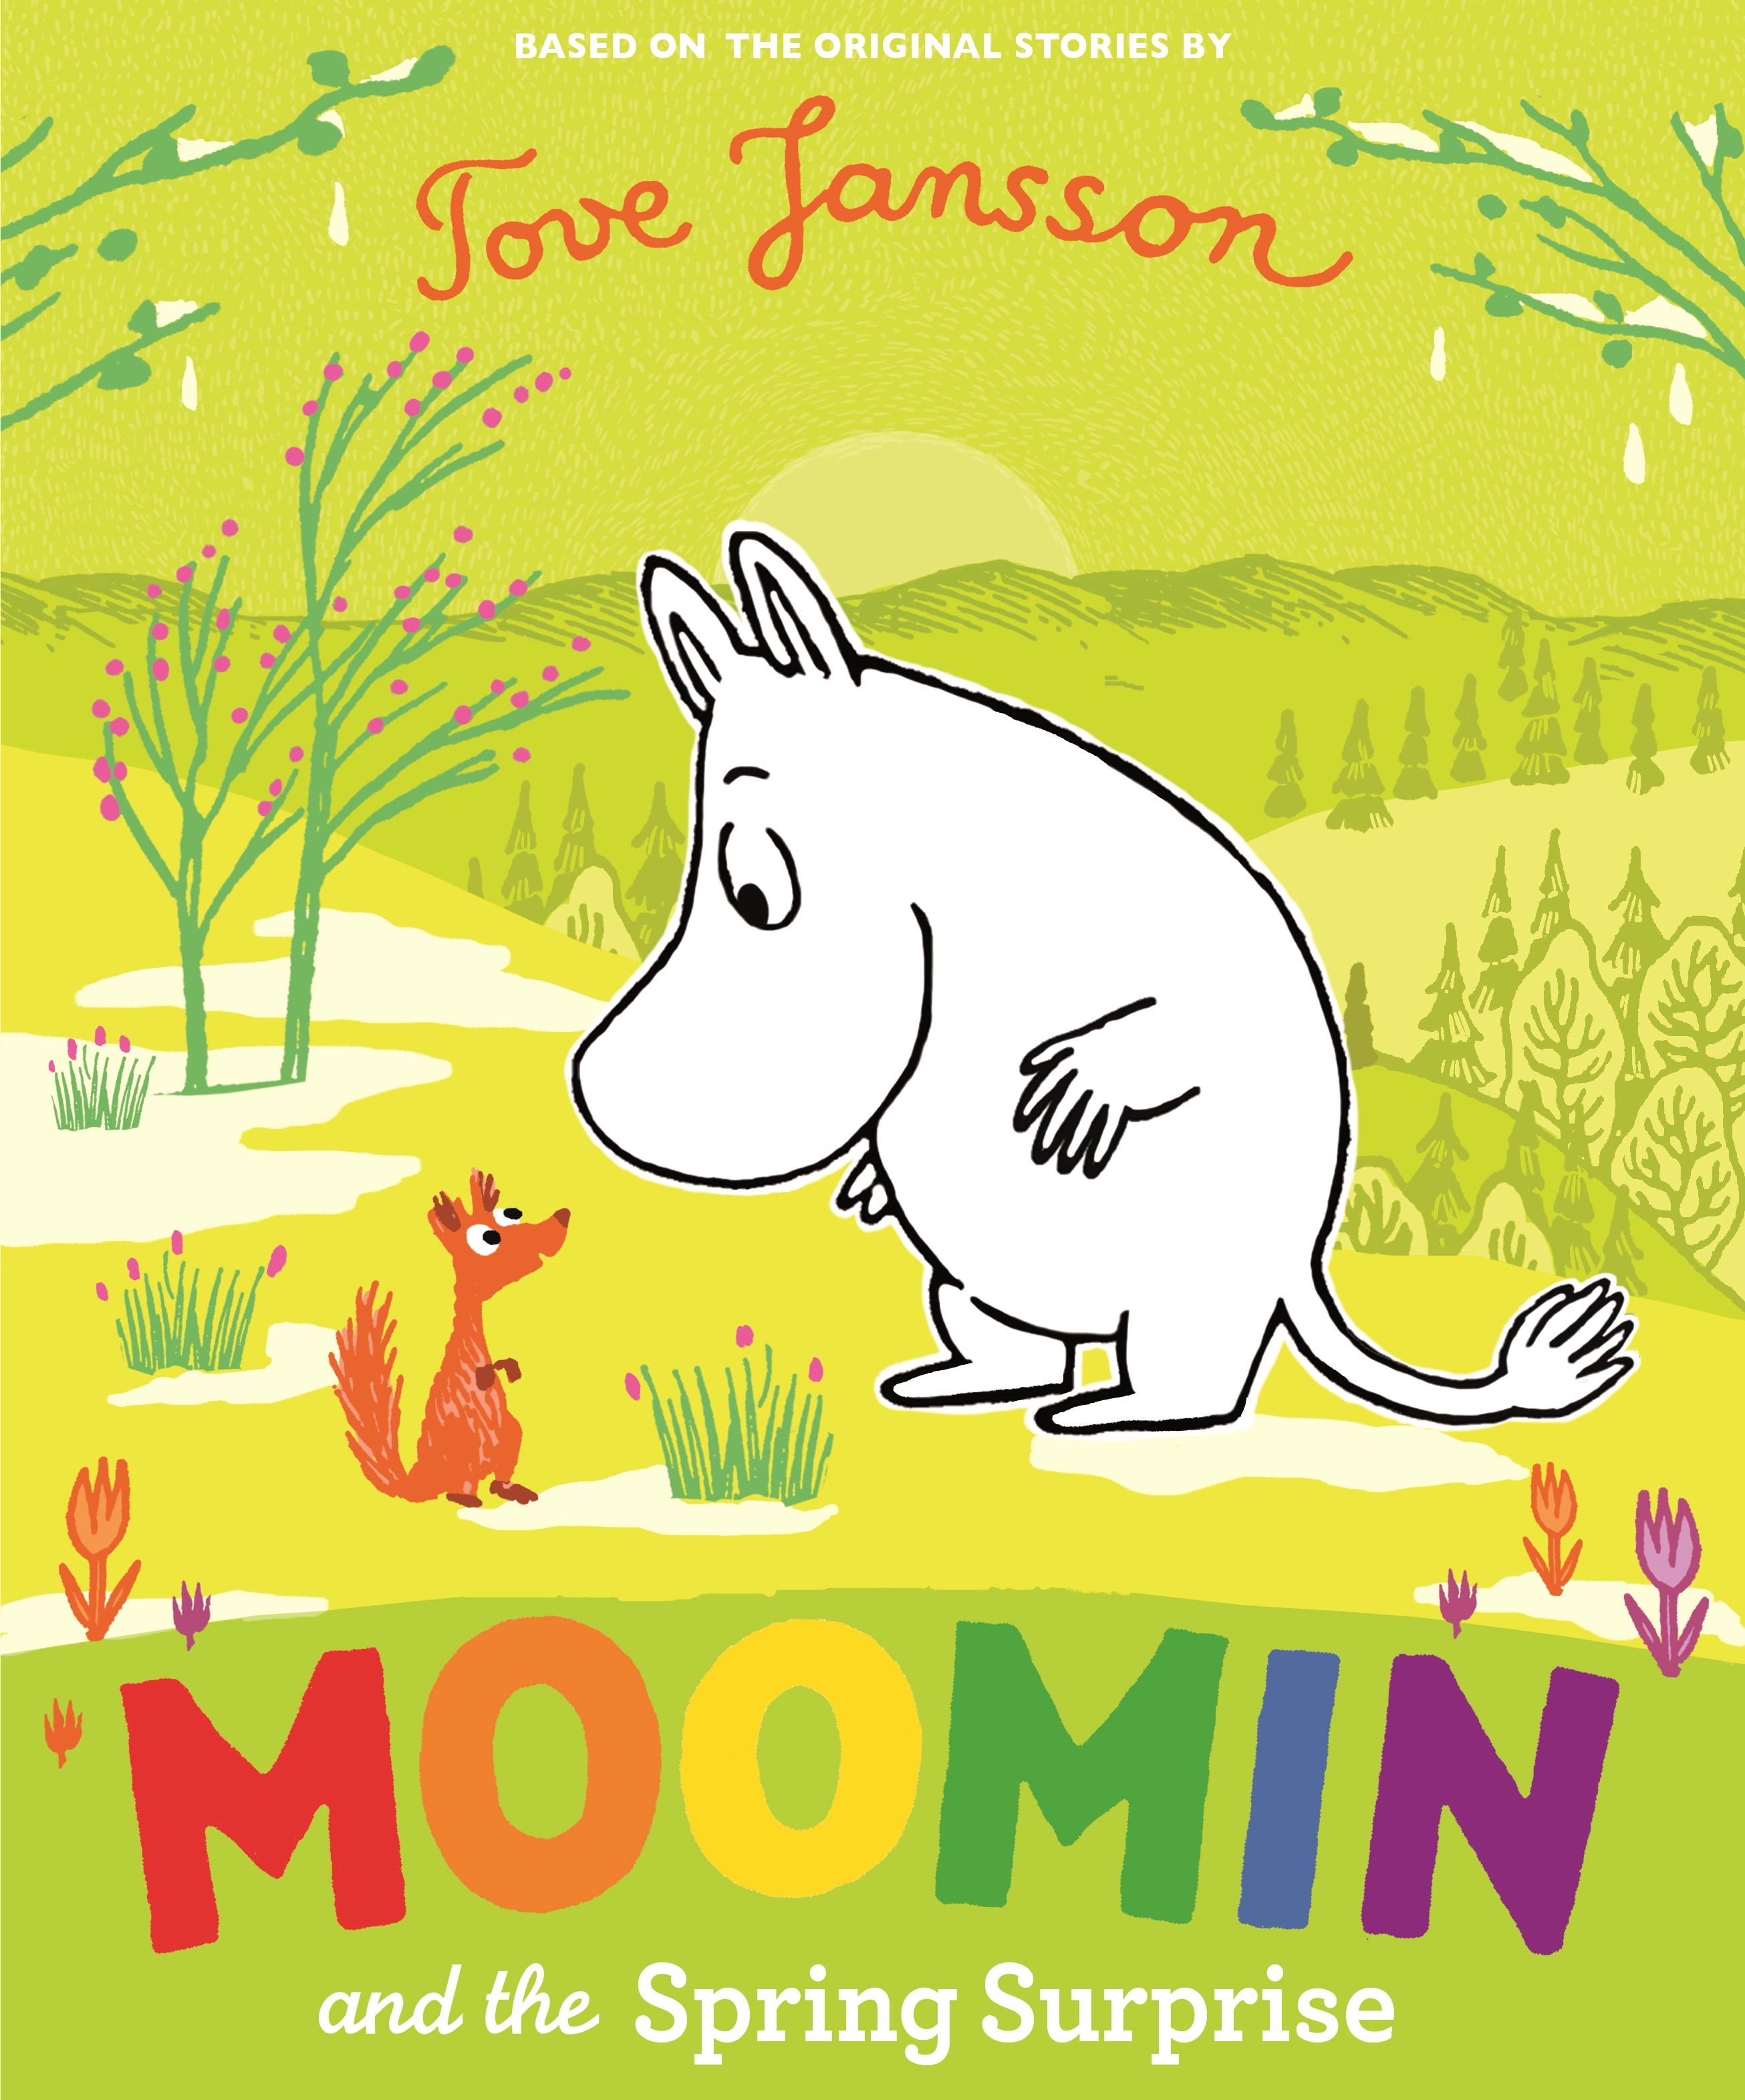 Book “Moomin and the Spring Surprise” by Tove Jansson — May 21, 2020